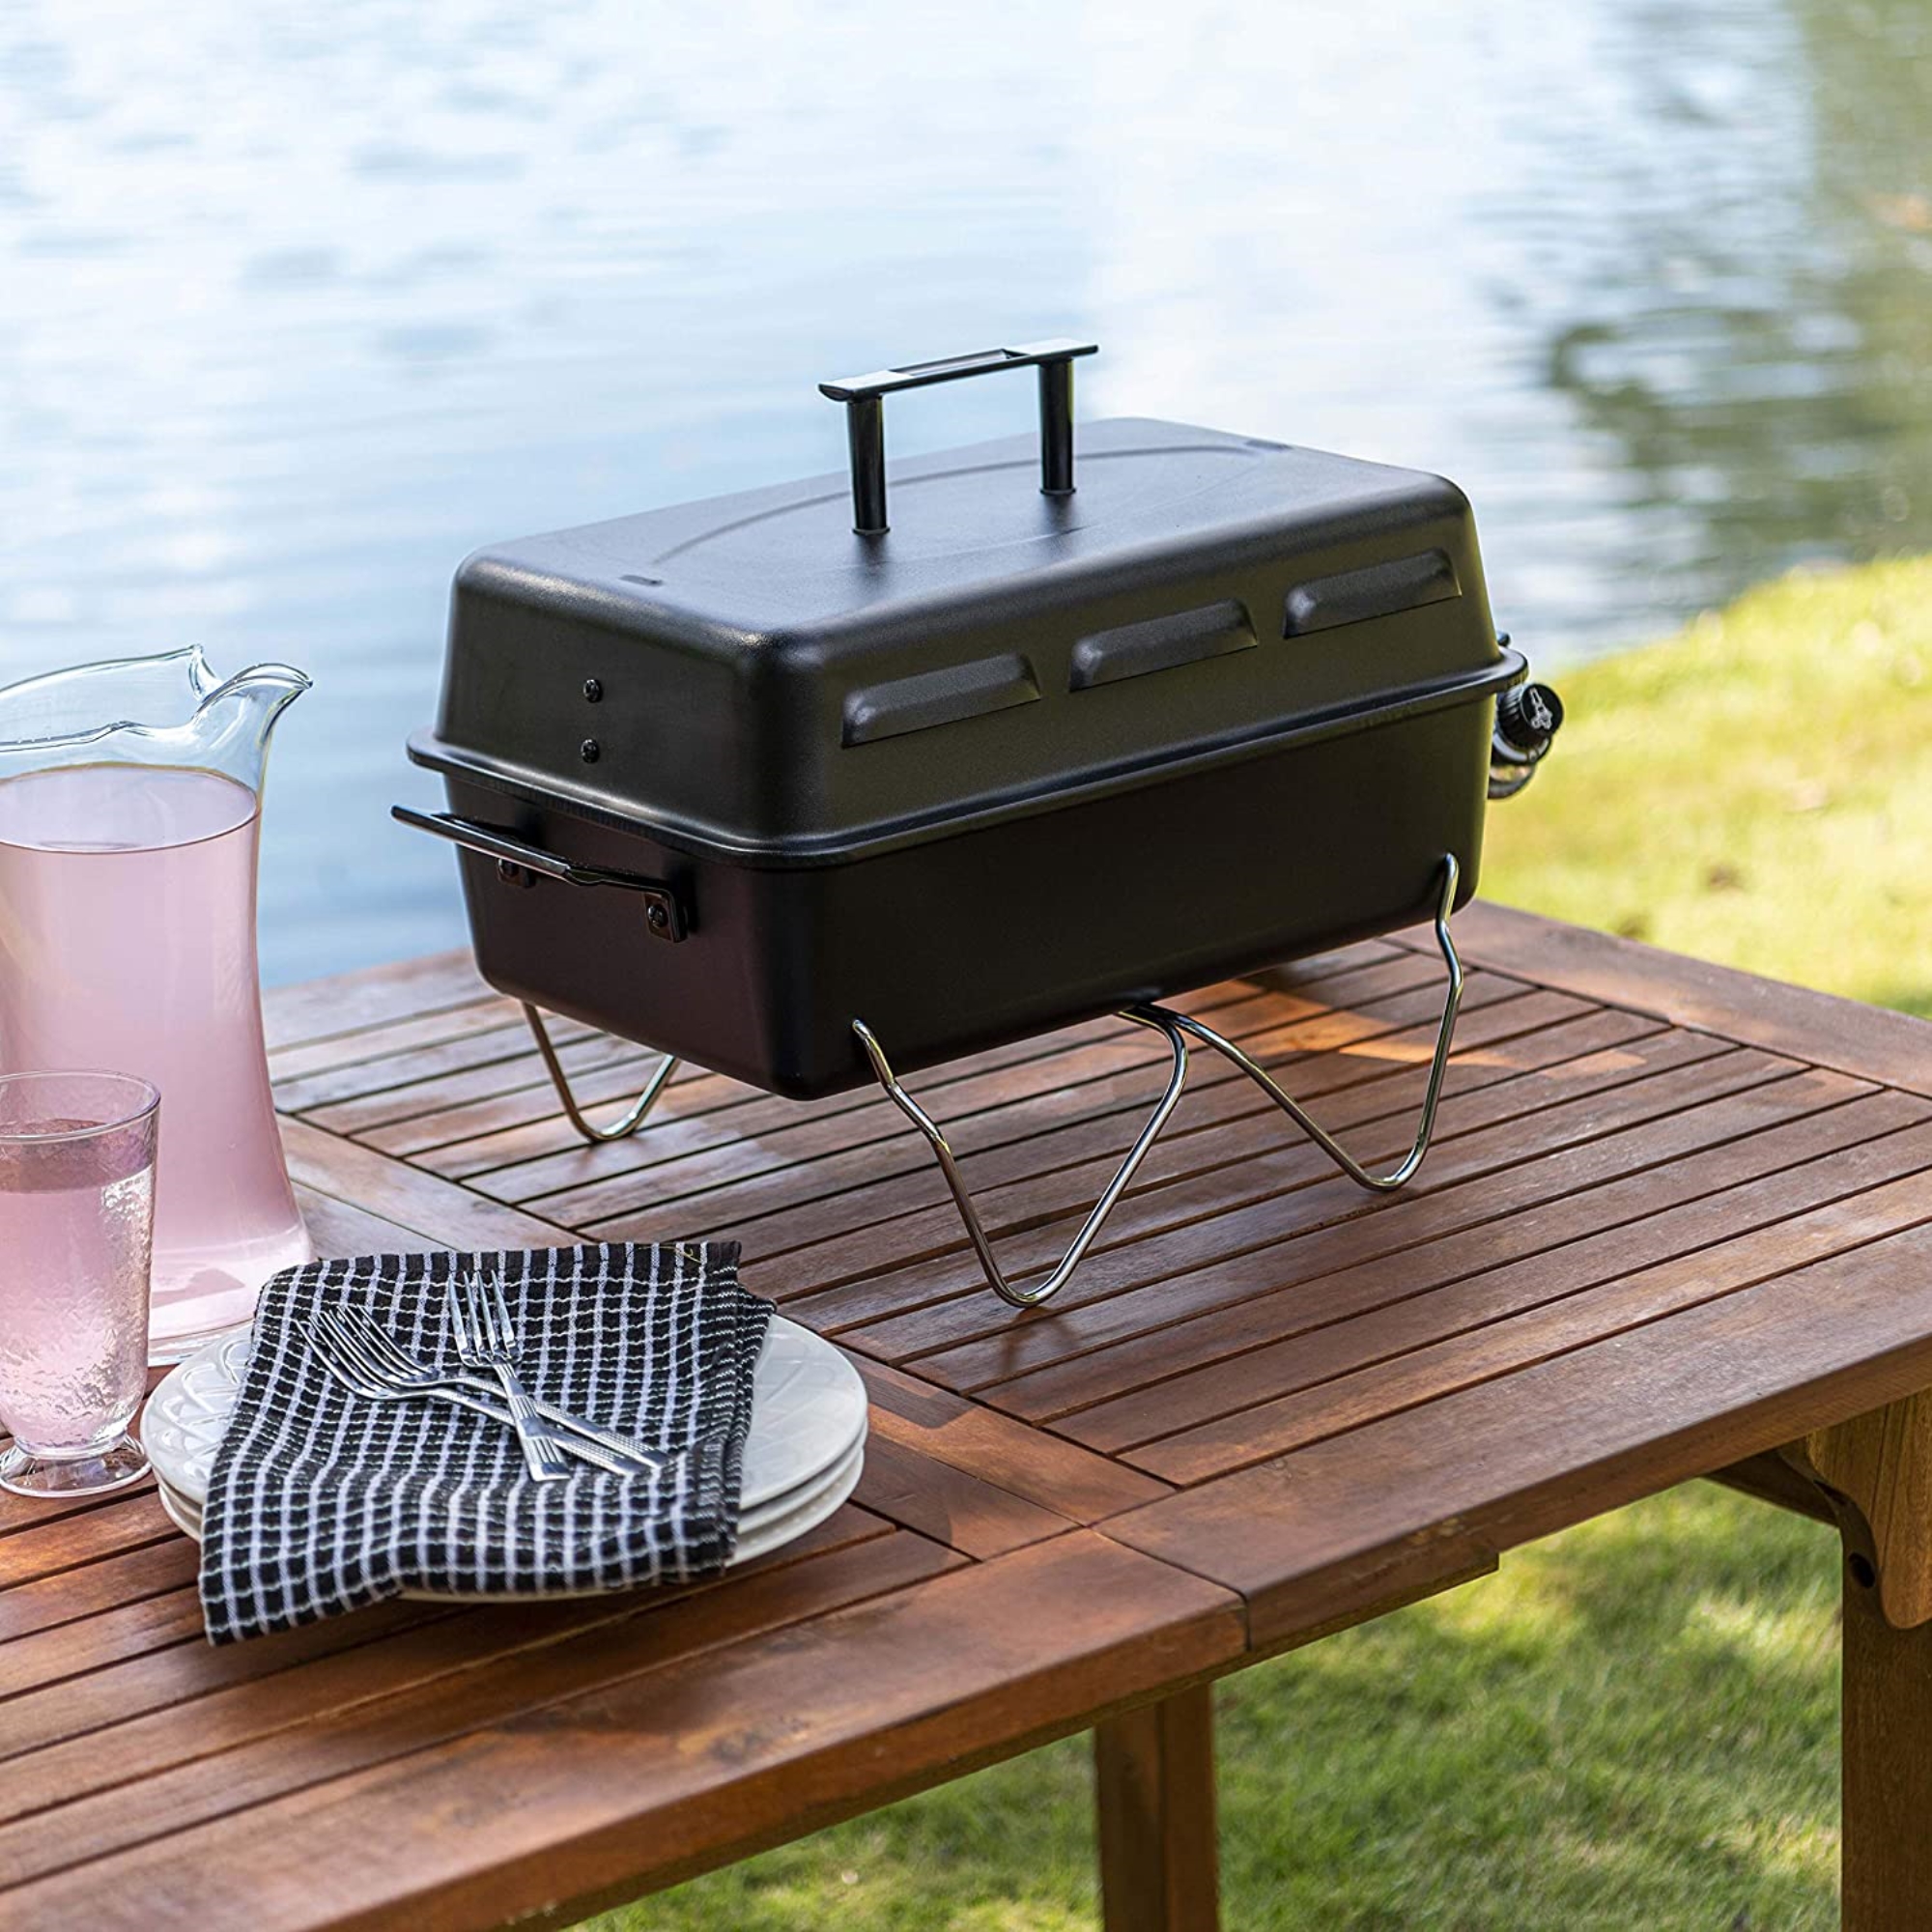 Char-Broil Portable Gas Grill - image 3 of 8